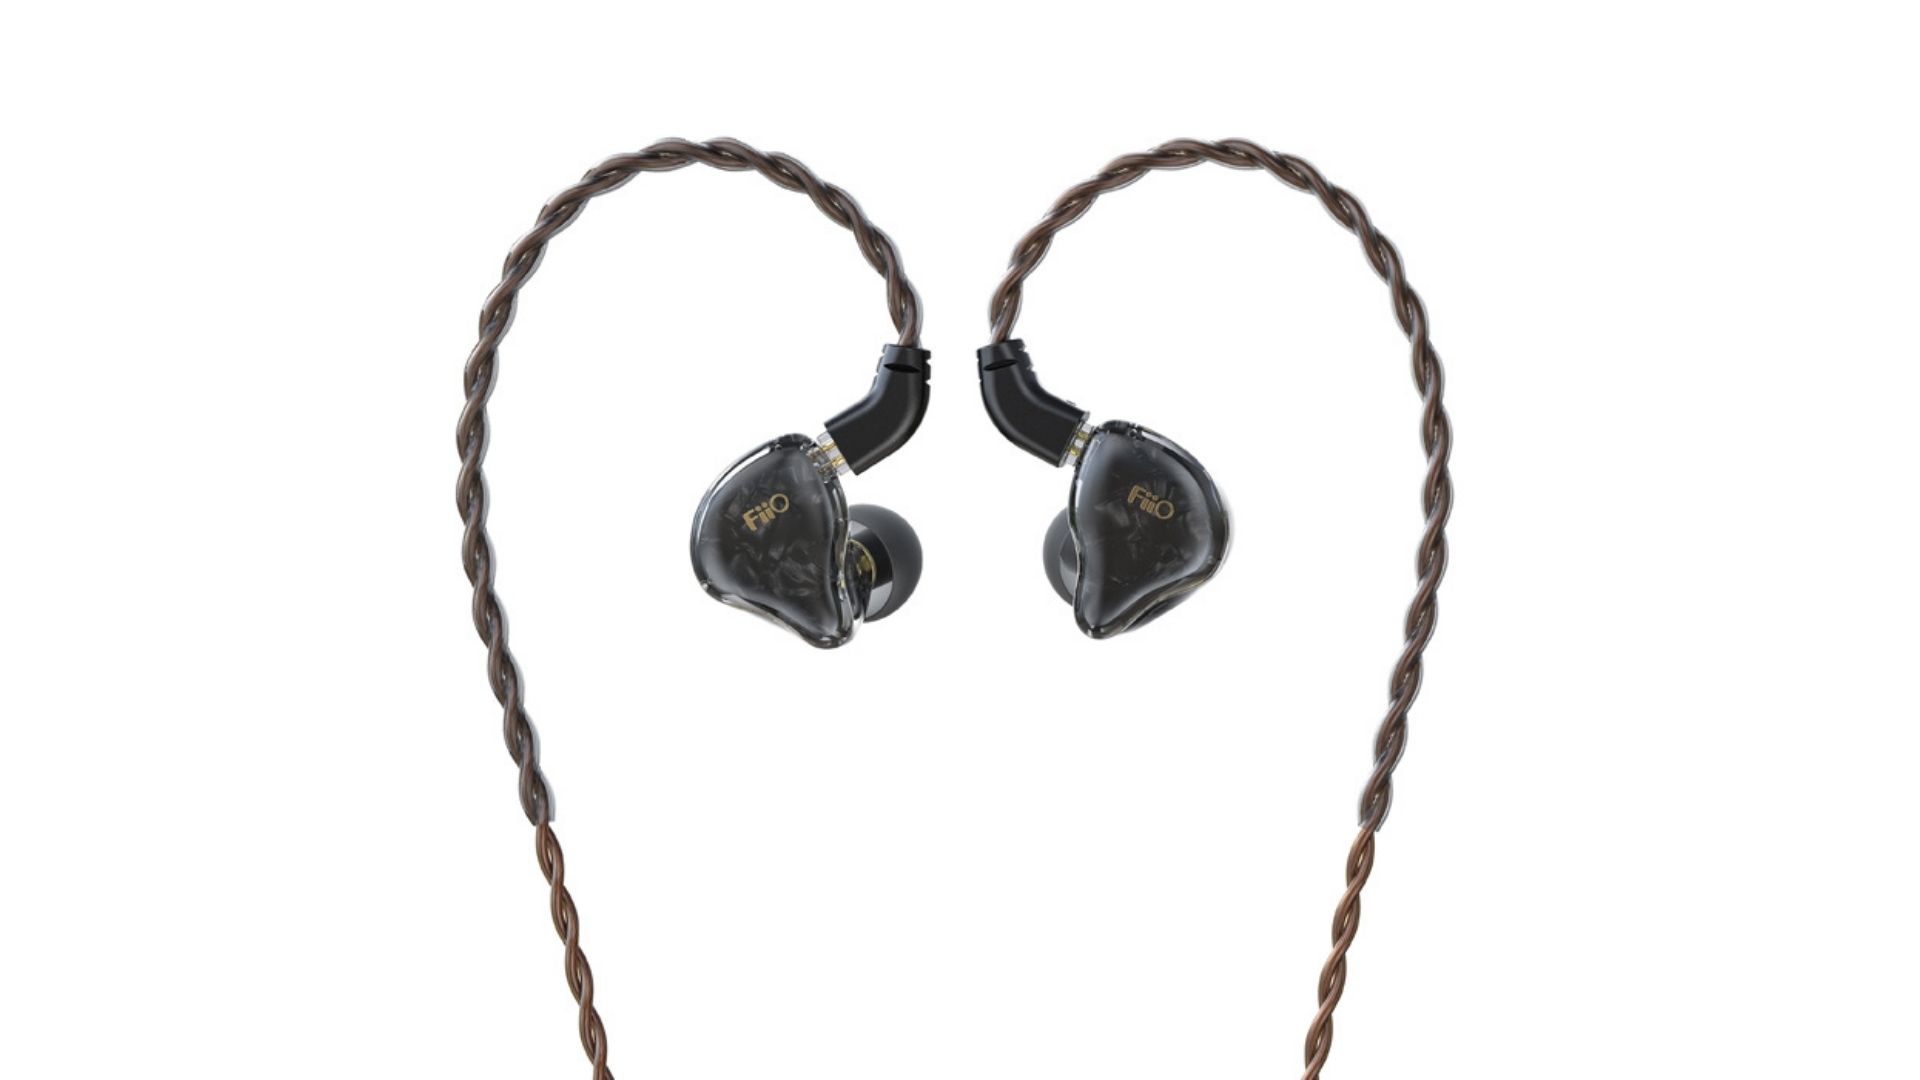 FiiO FD1 Hi-Res Earbuds wired